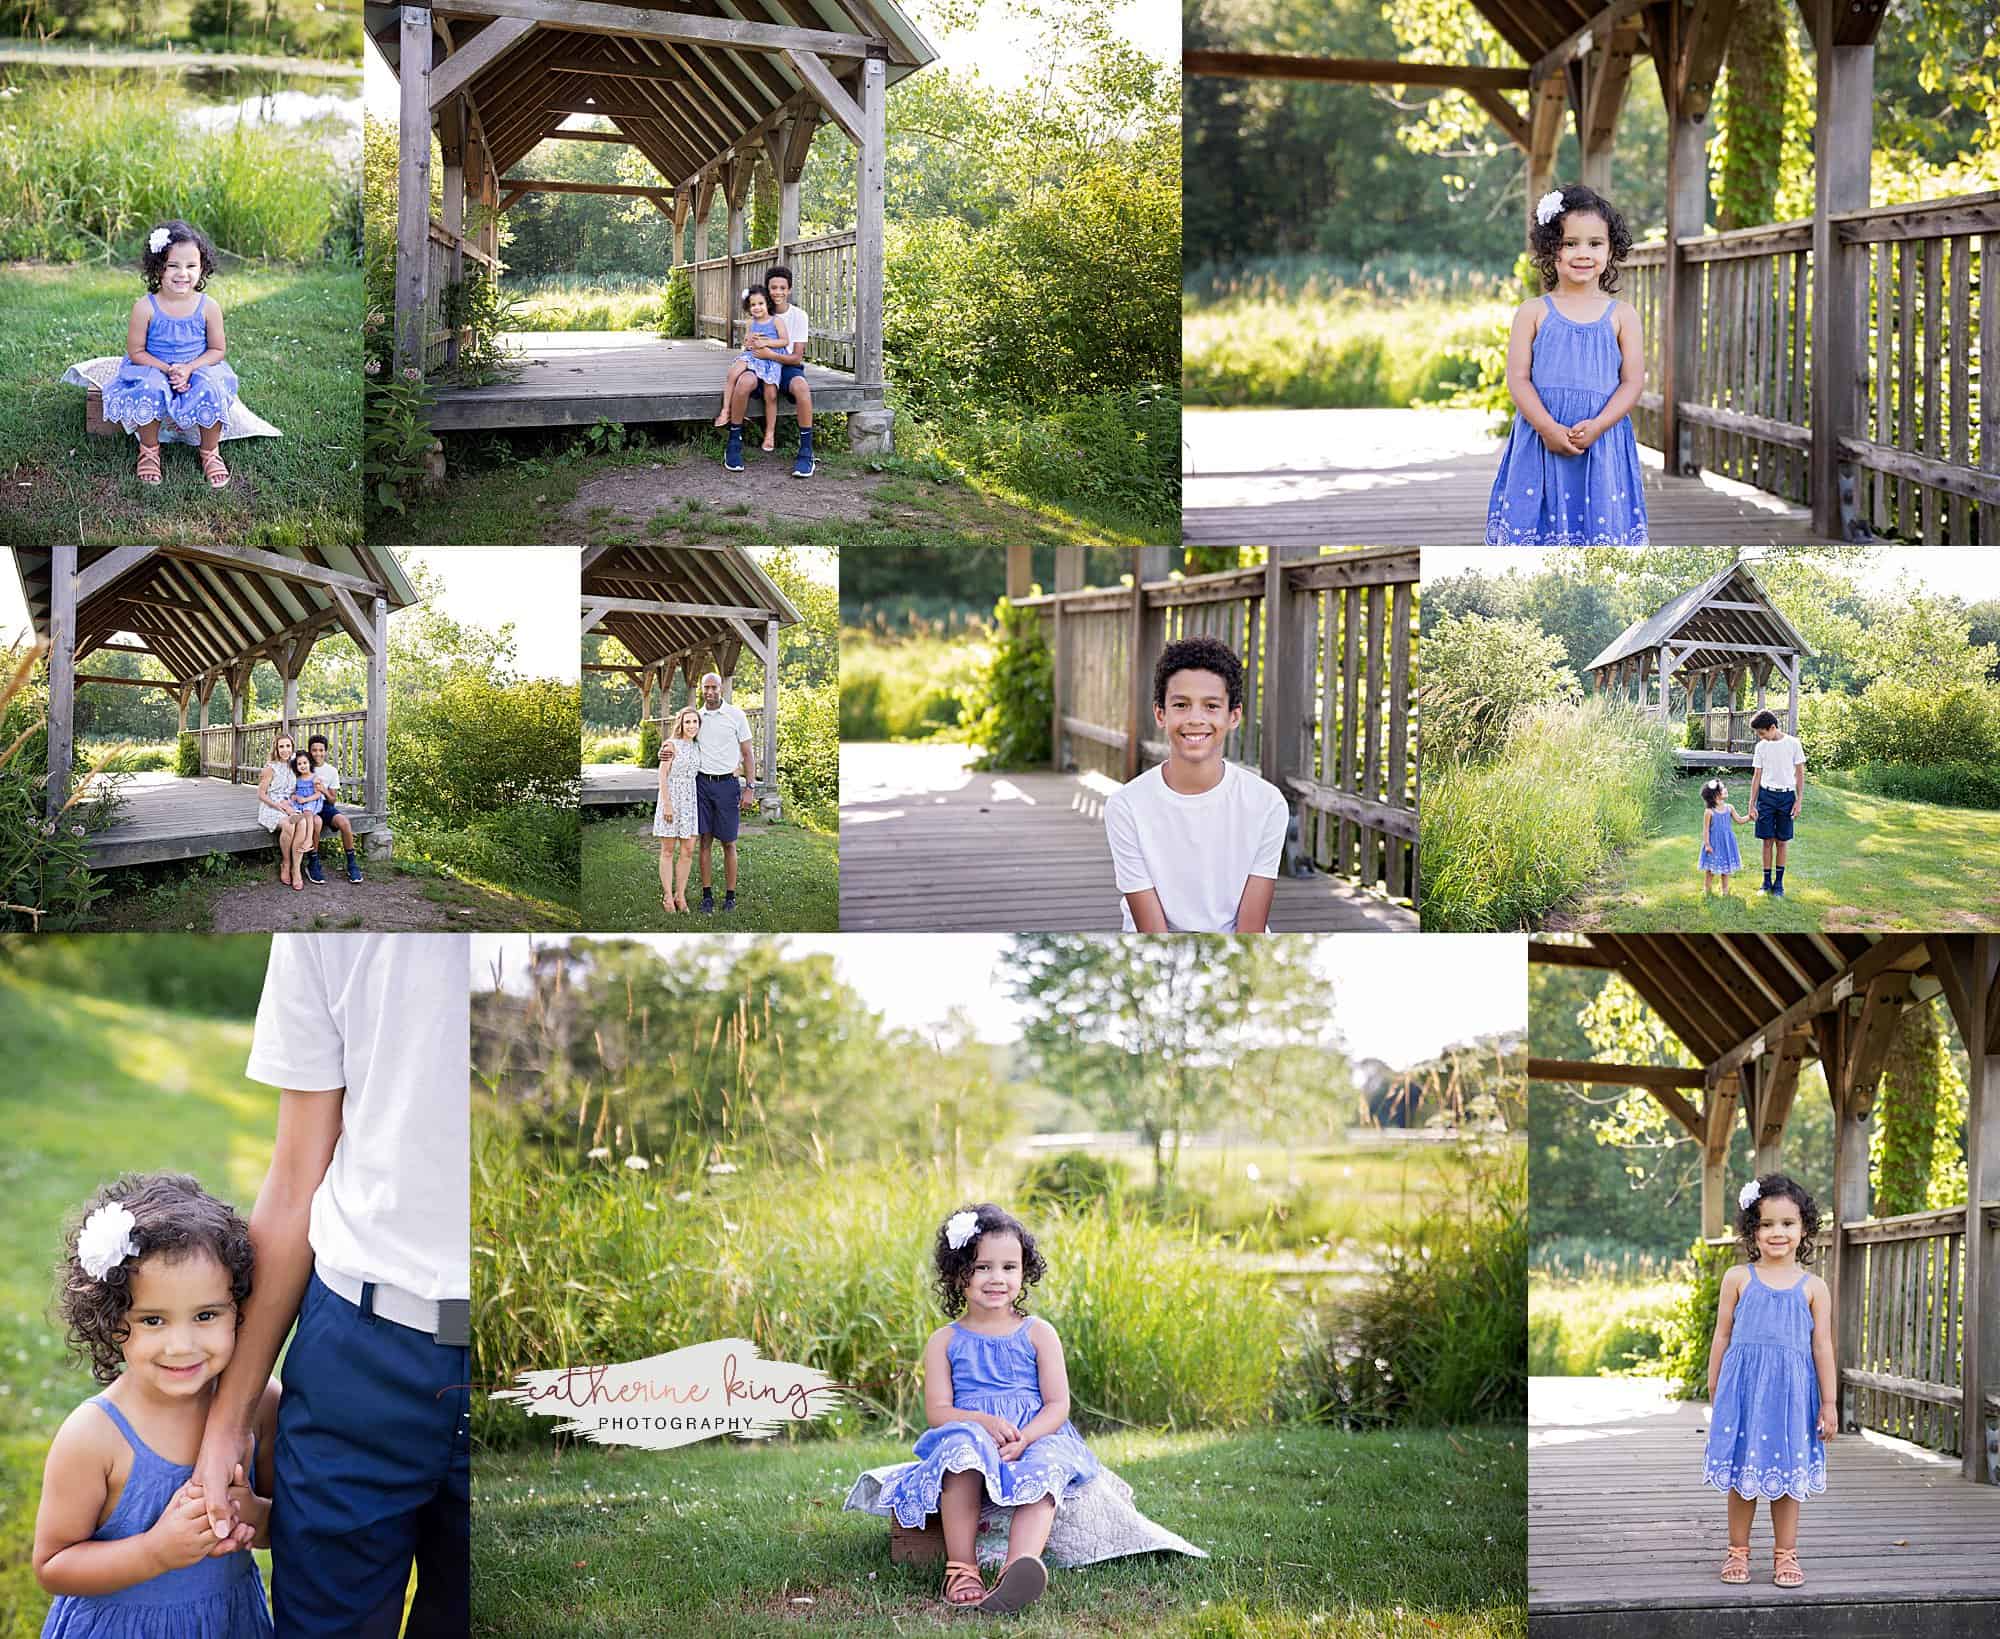 Bauer Farm rustic family photography session with the C family